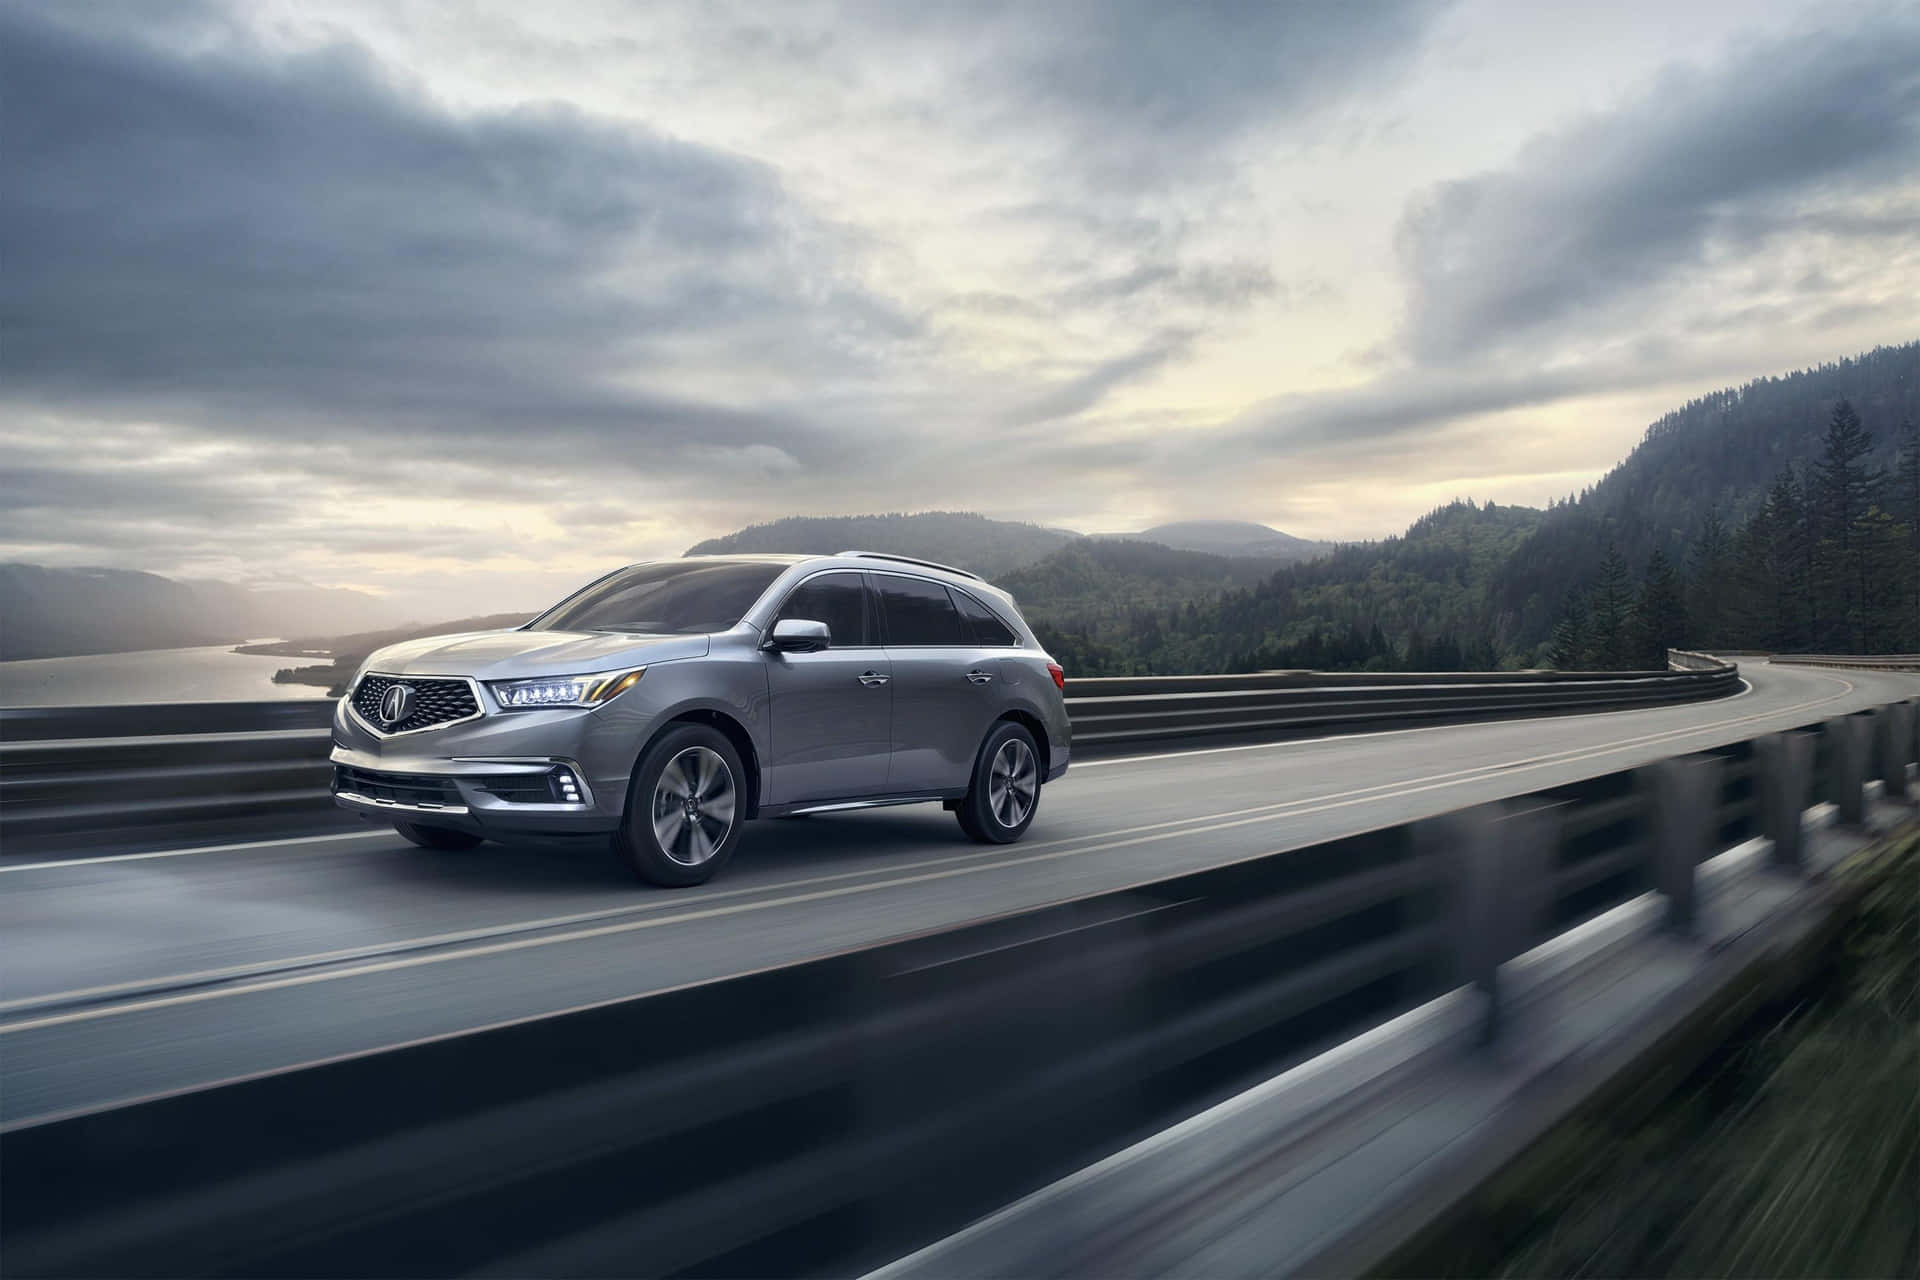 Stunning Acura MDX in motion on a scenic road Wallpaper